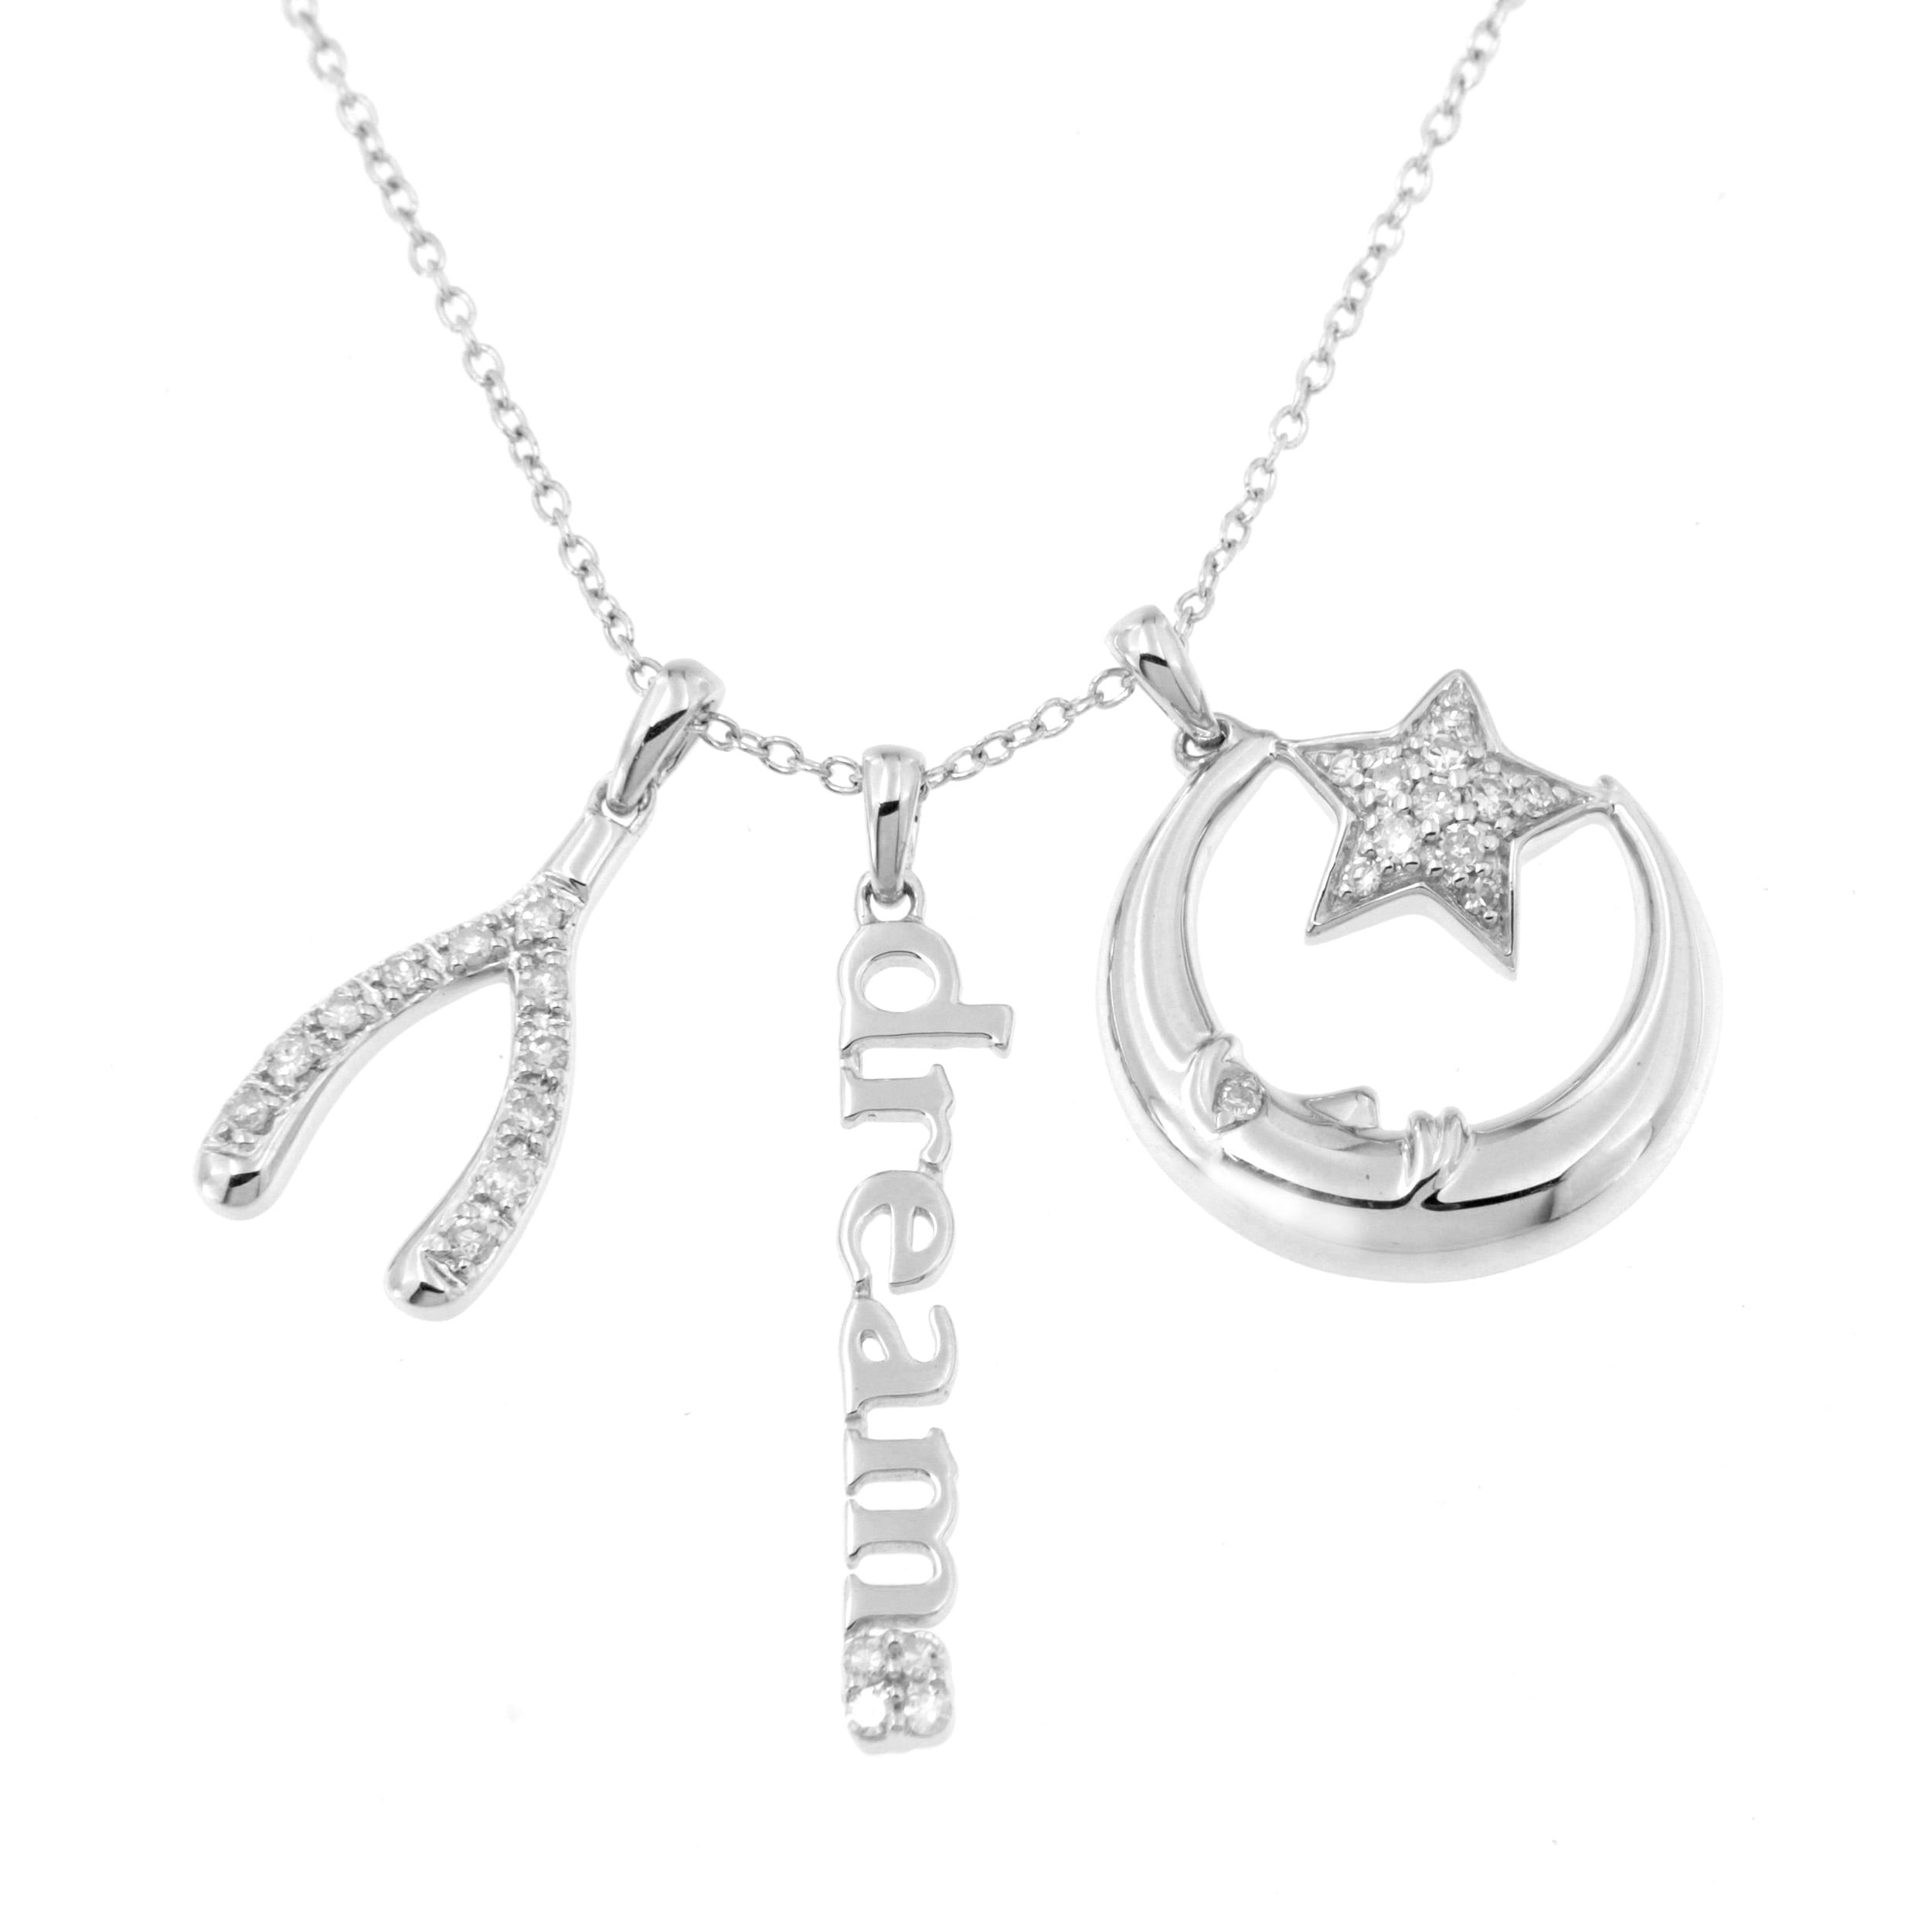 Natalia Drake 1/4 Cttw Diamond Star and Dreams Charm Necklace with